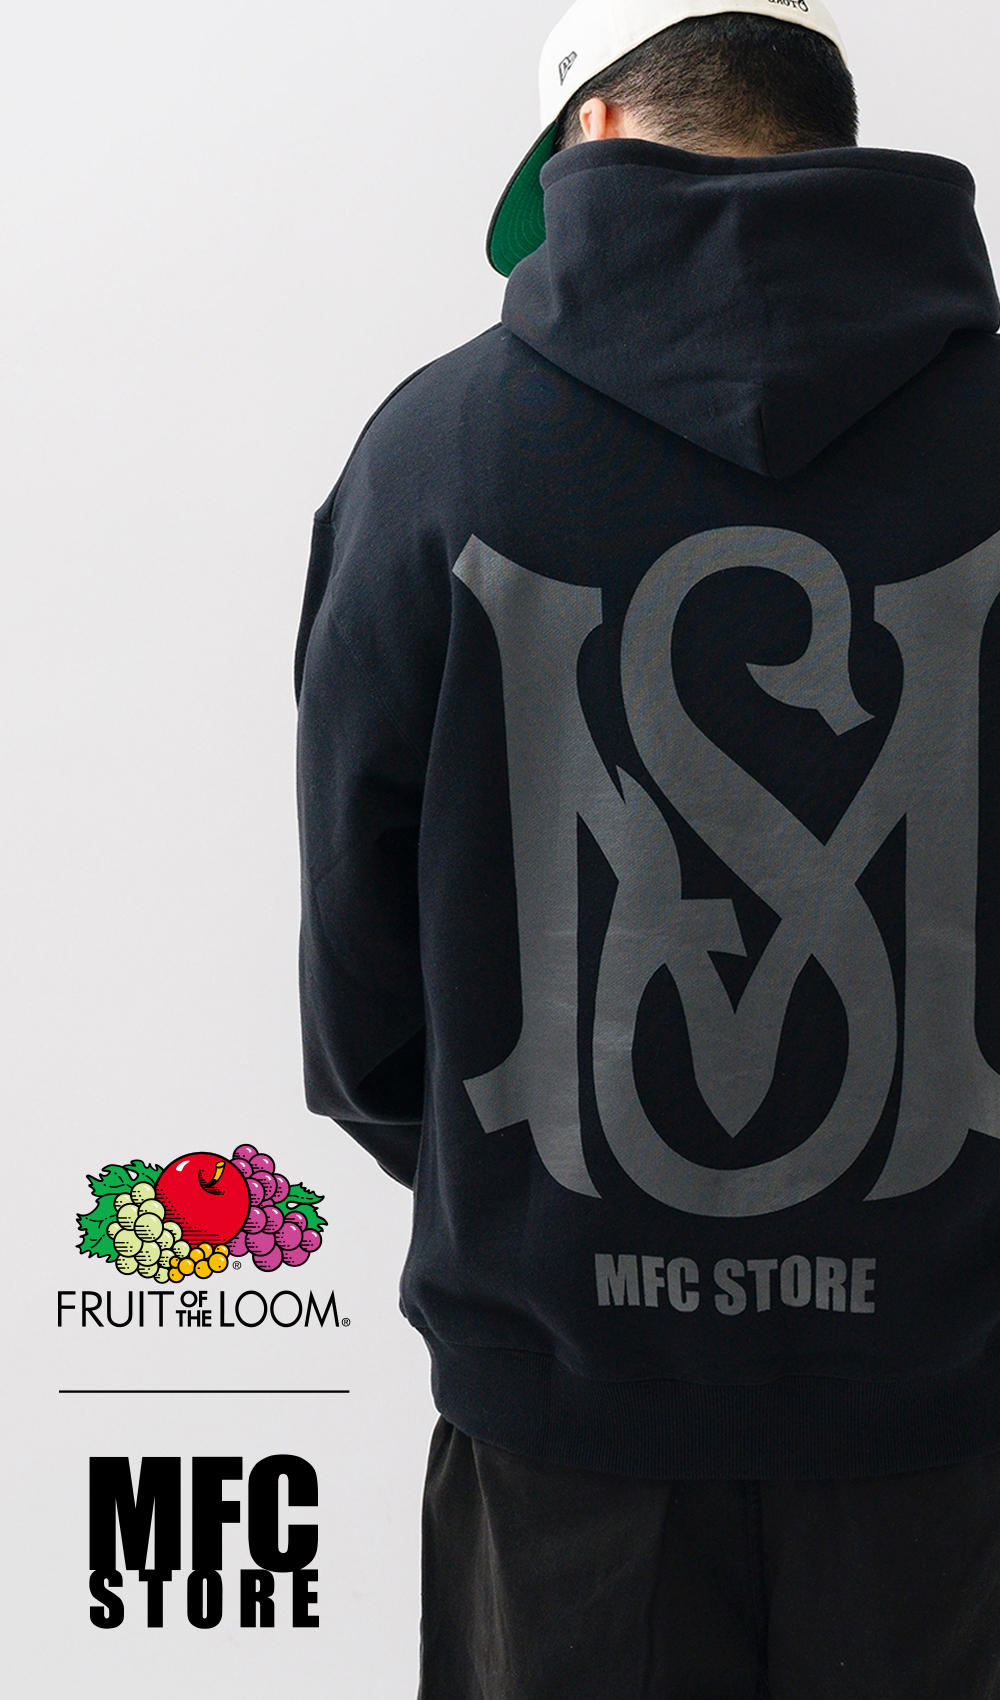 FRUIT OF THE LOOM x MFC STORE MS LOGO